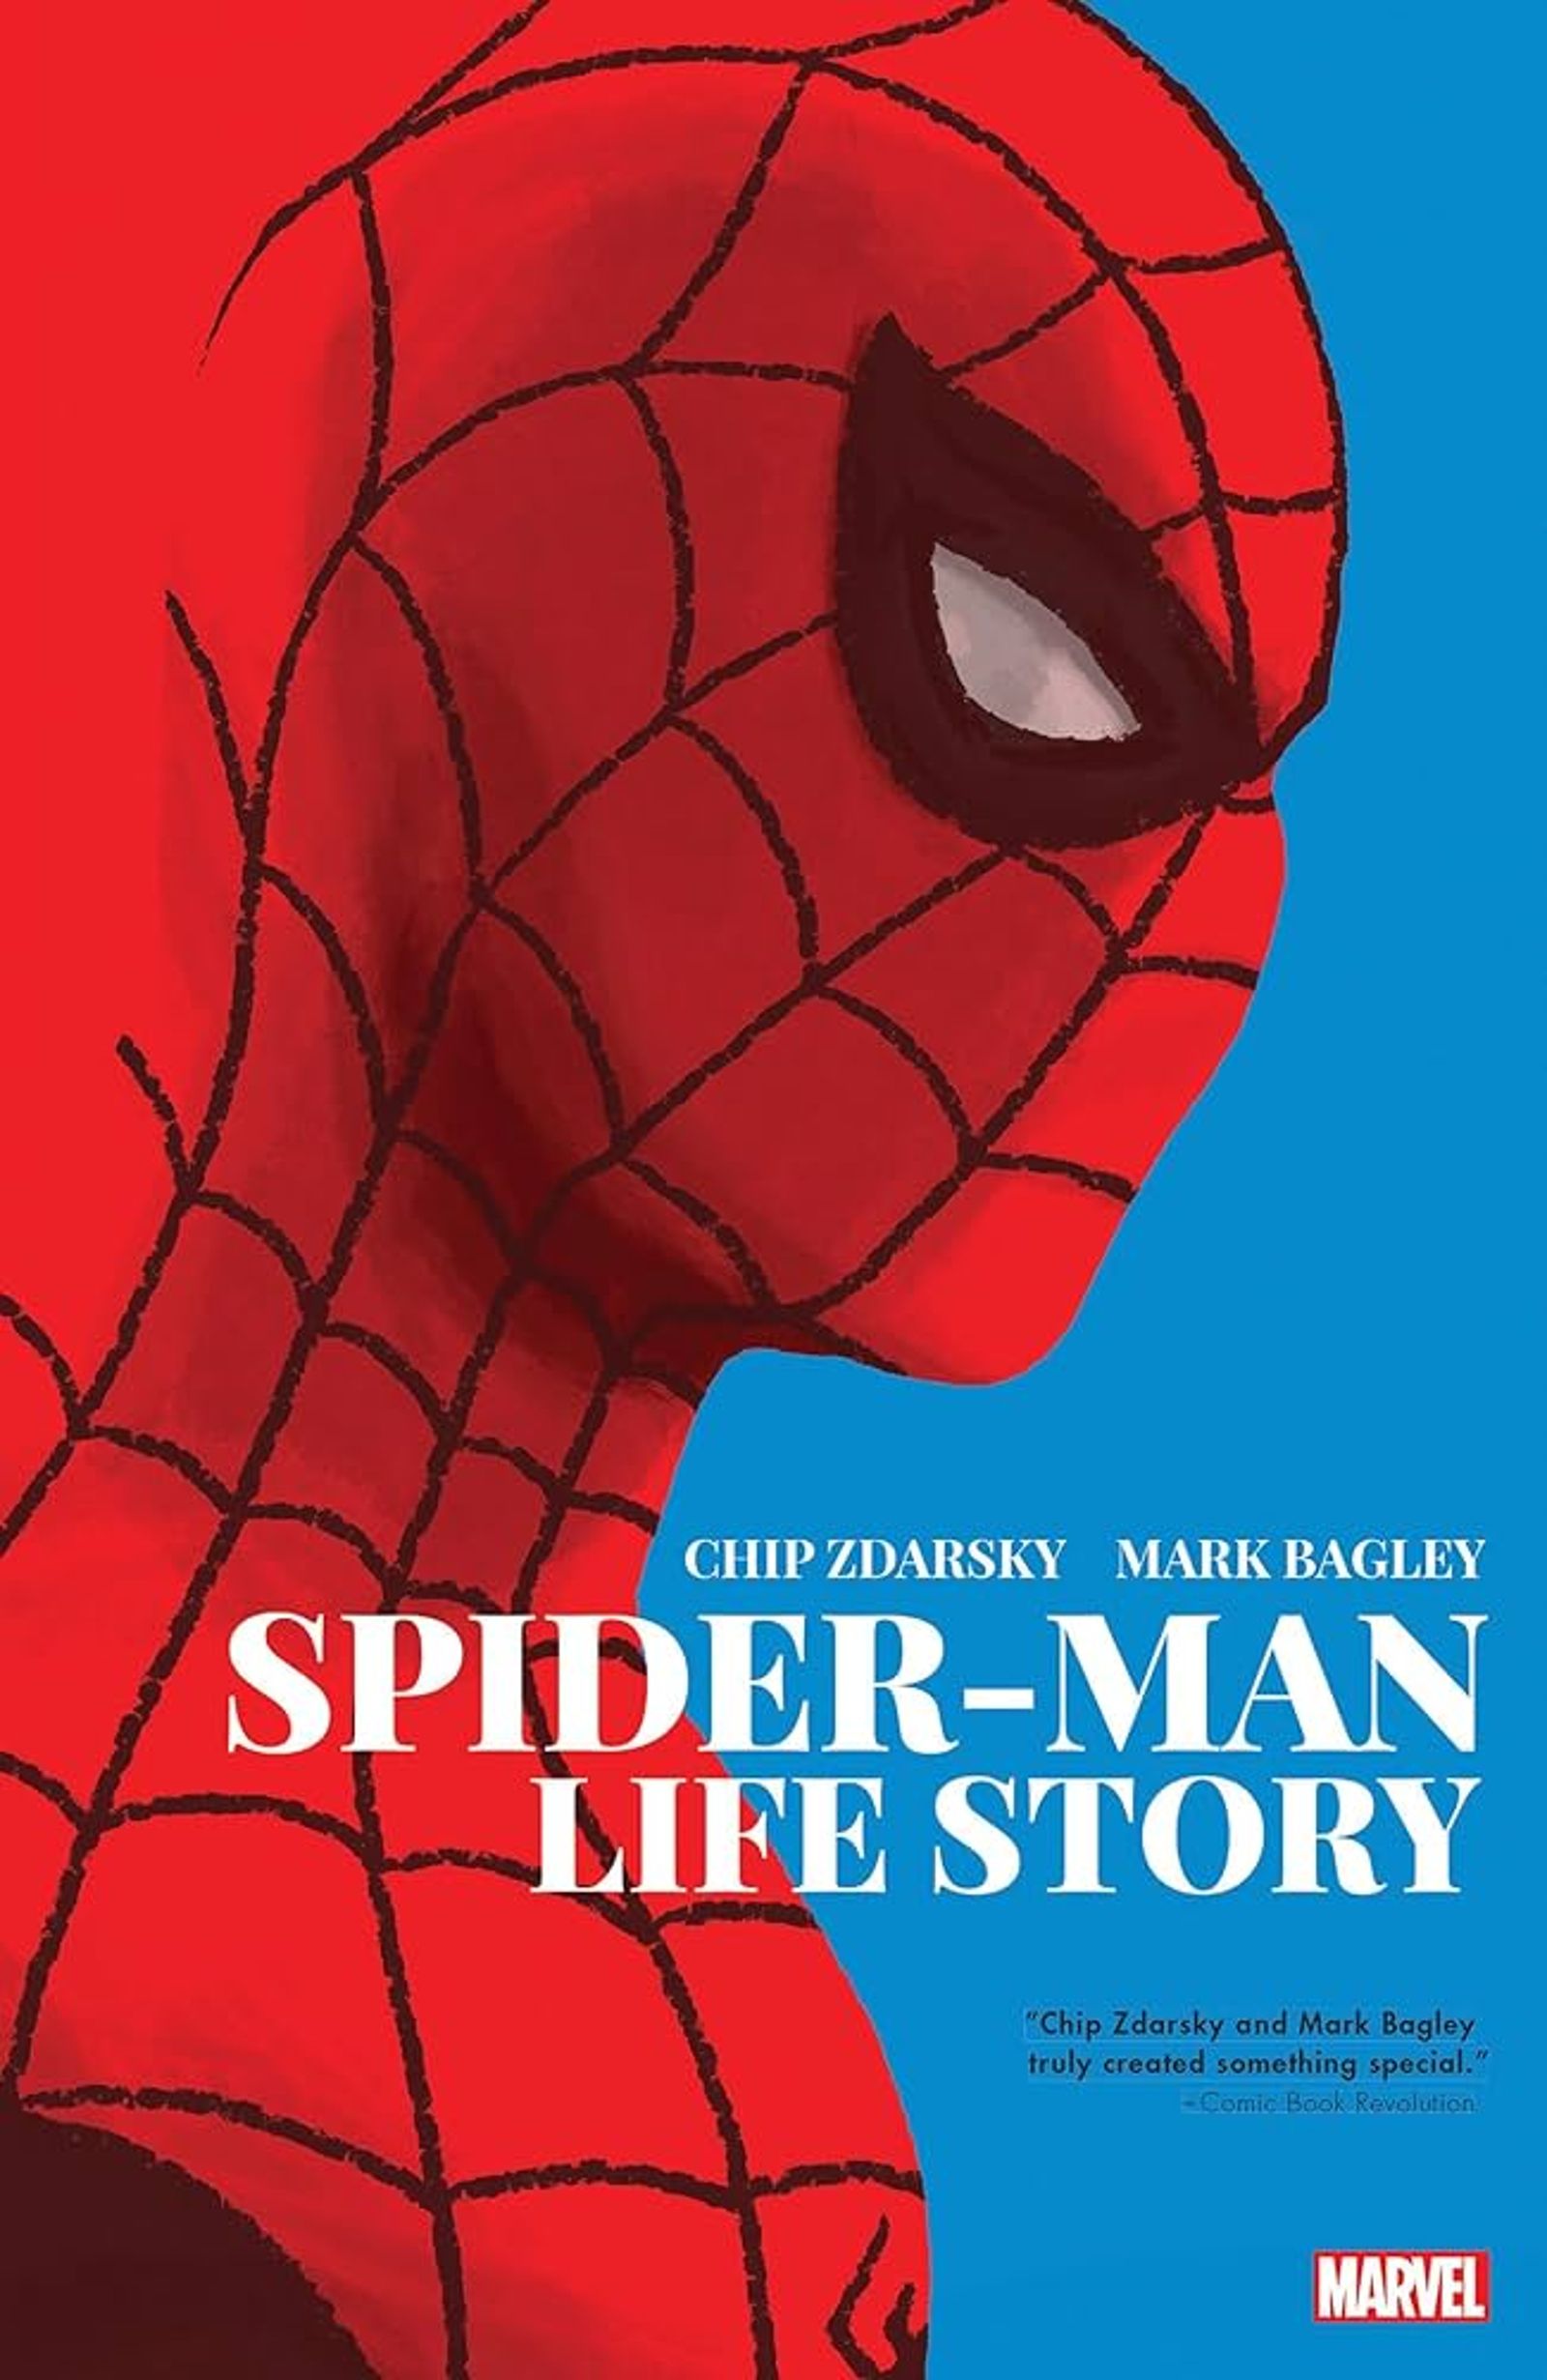 Spider-Man Life Story cover full